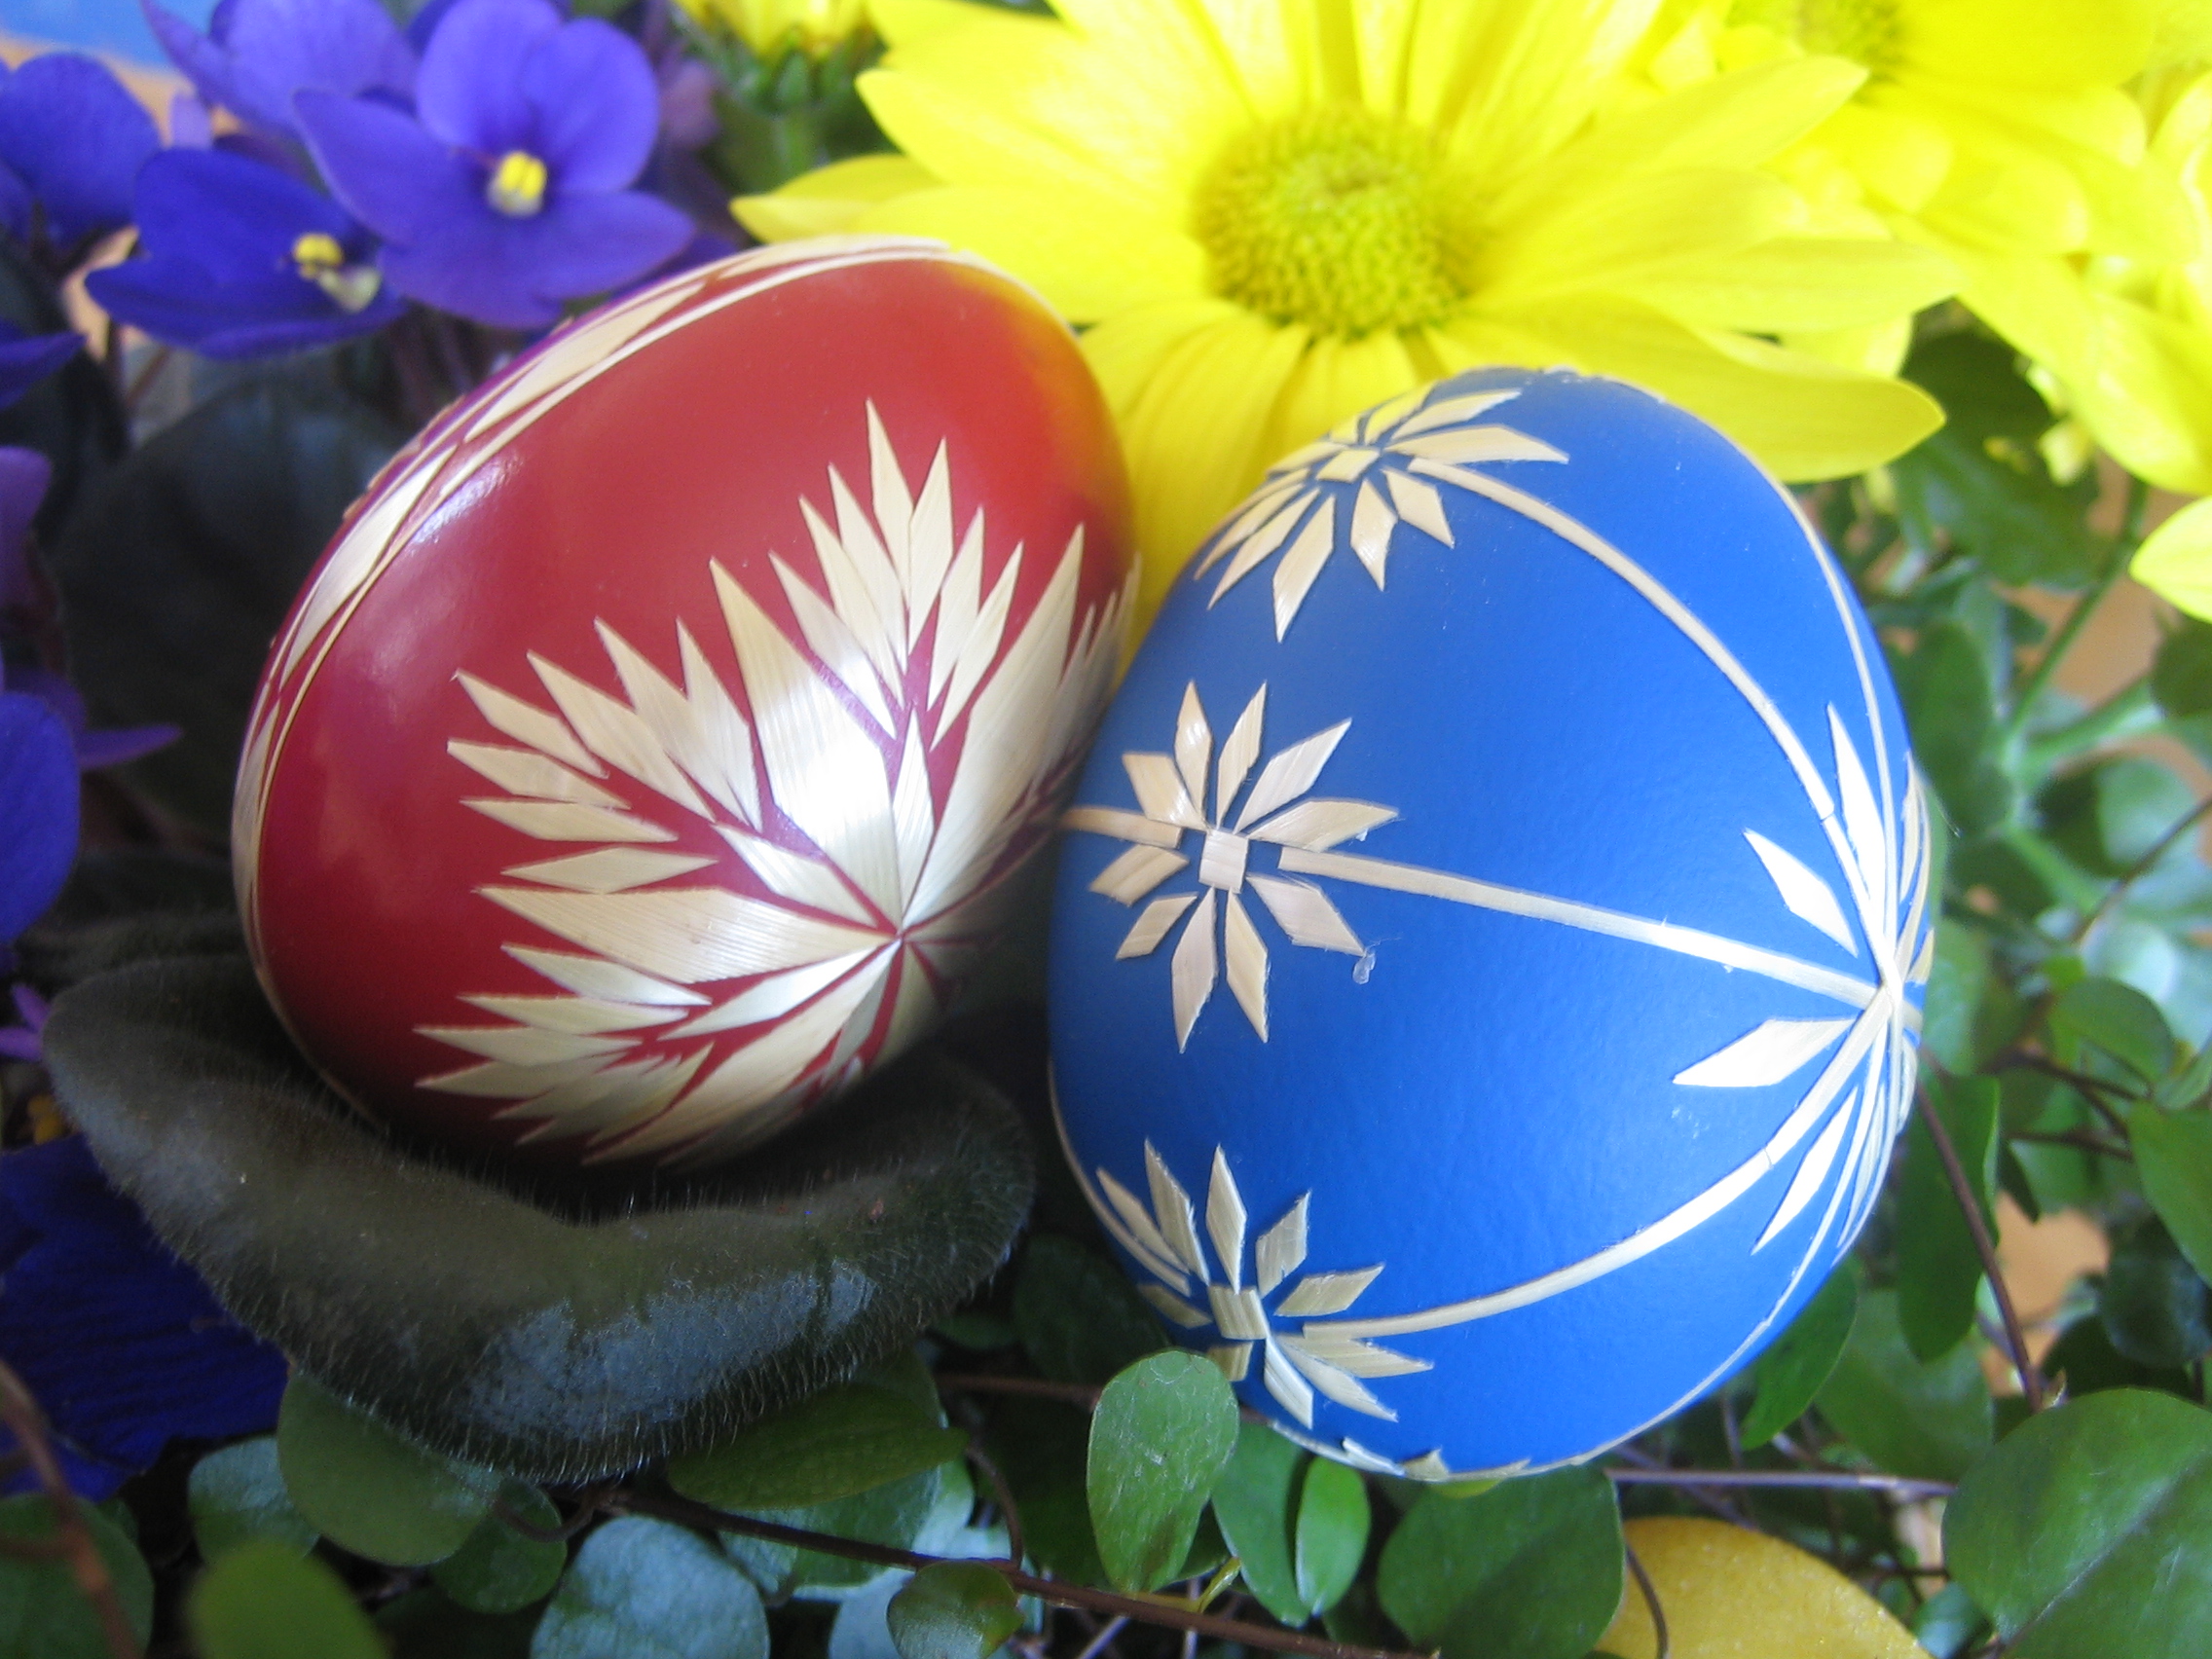 Red and blue Easter